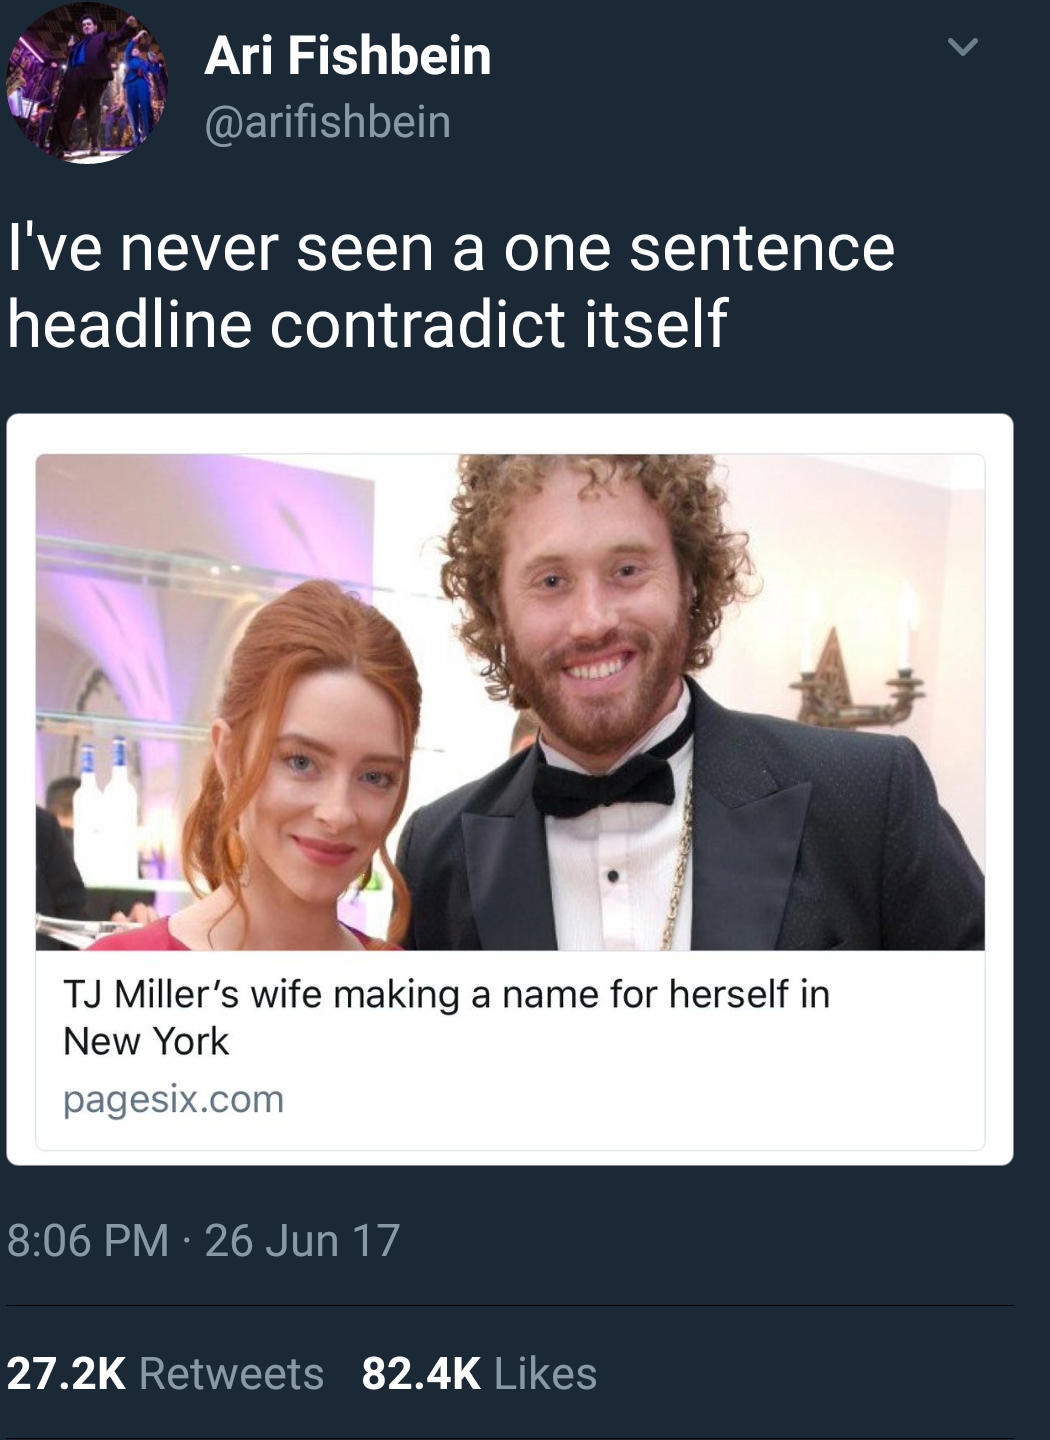 tj miller's wife making a name for herself - Ari Fishbein I've never seen a one sentence headline contradict itself Tj Miller's wife making a name for herself in New York pagesix.com 26 Jun 17